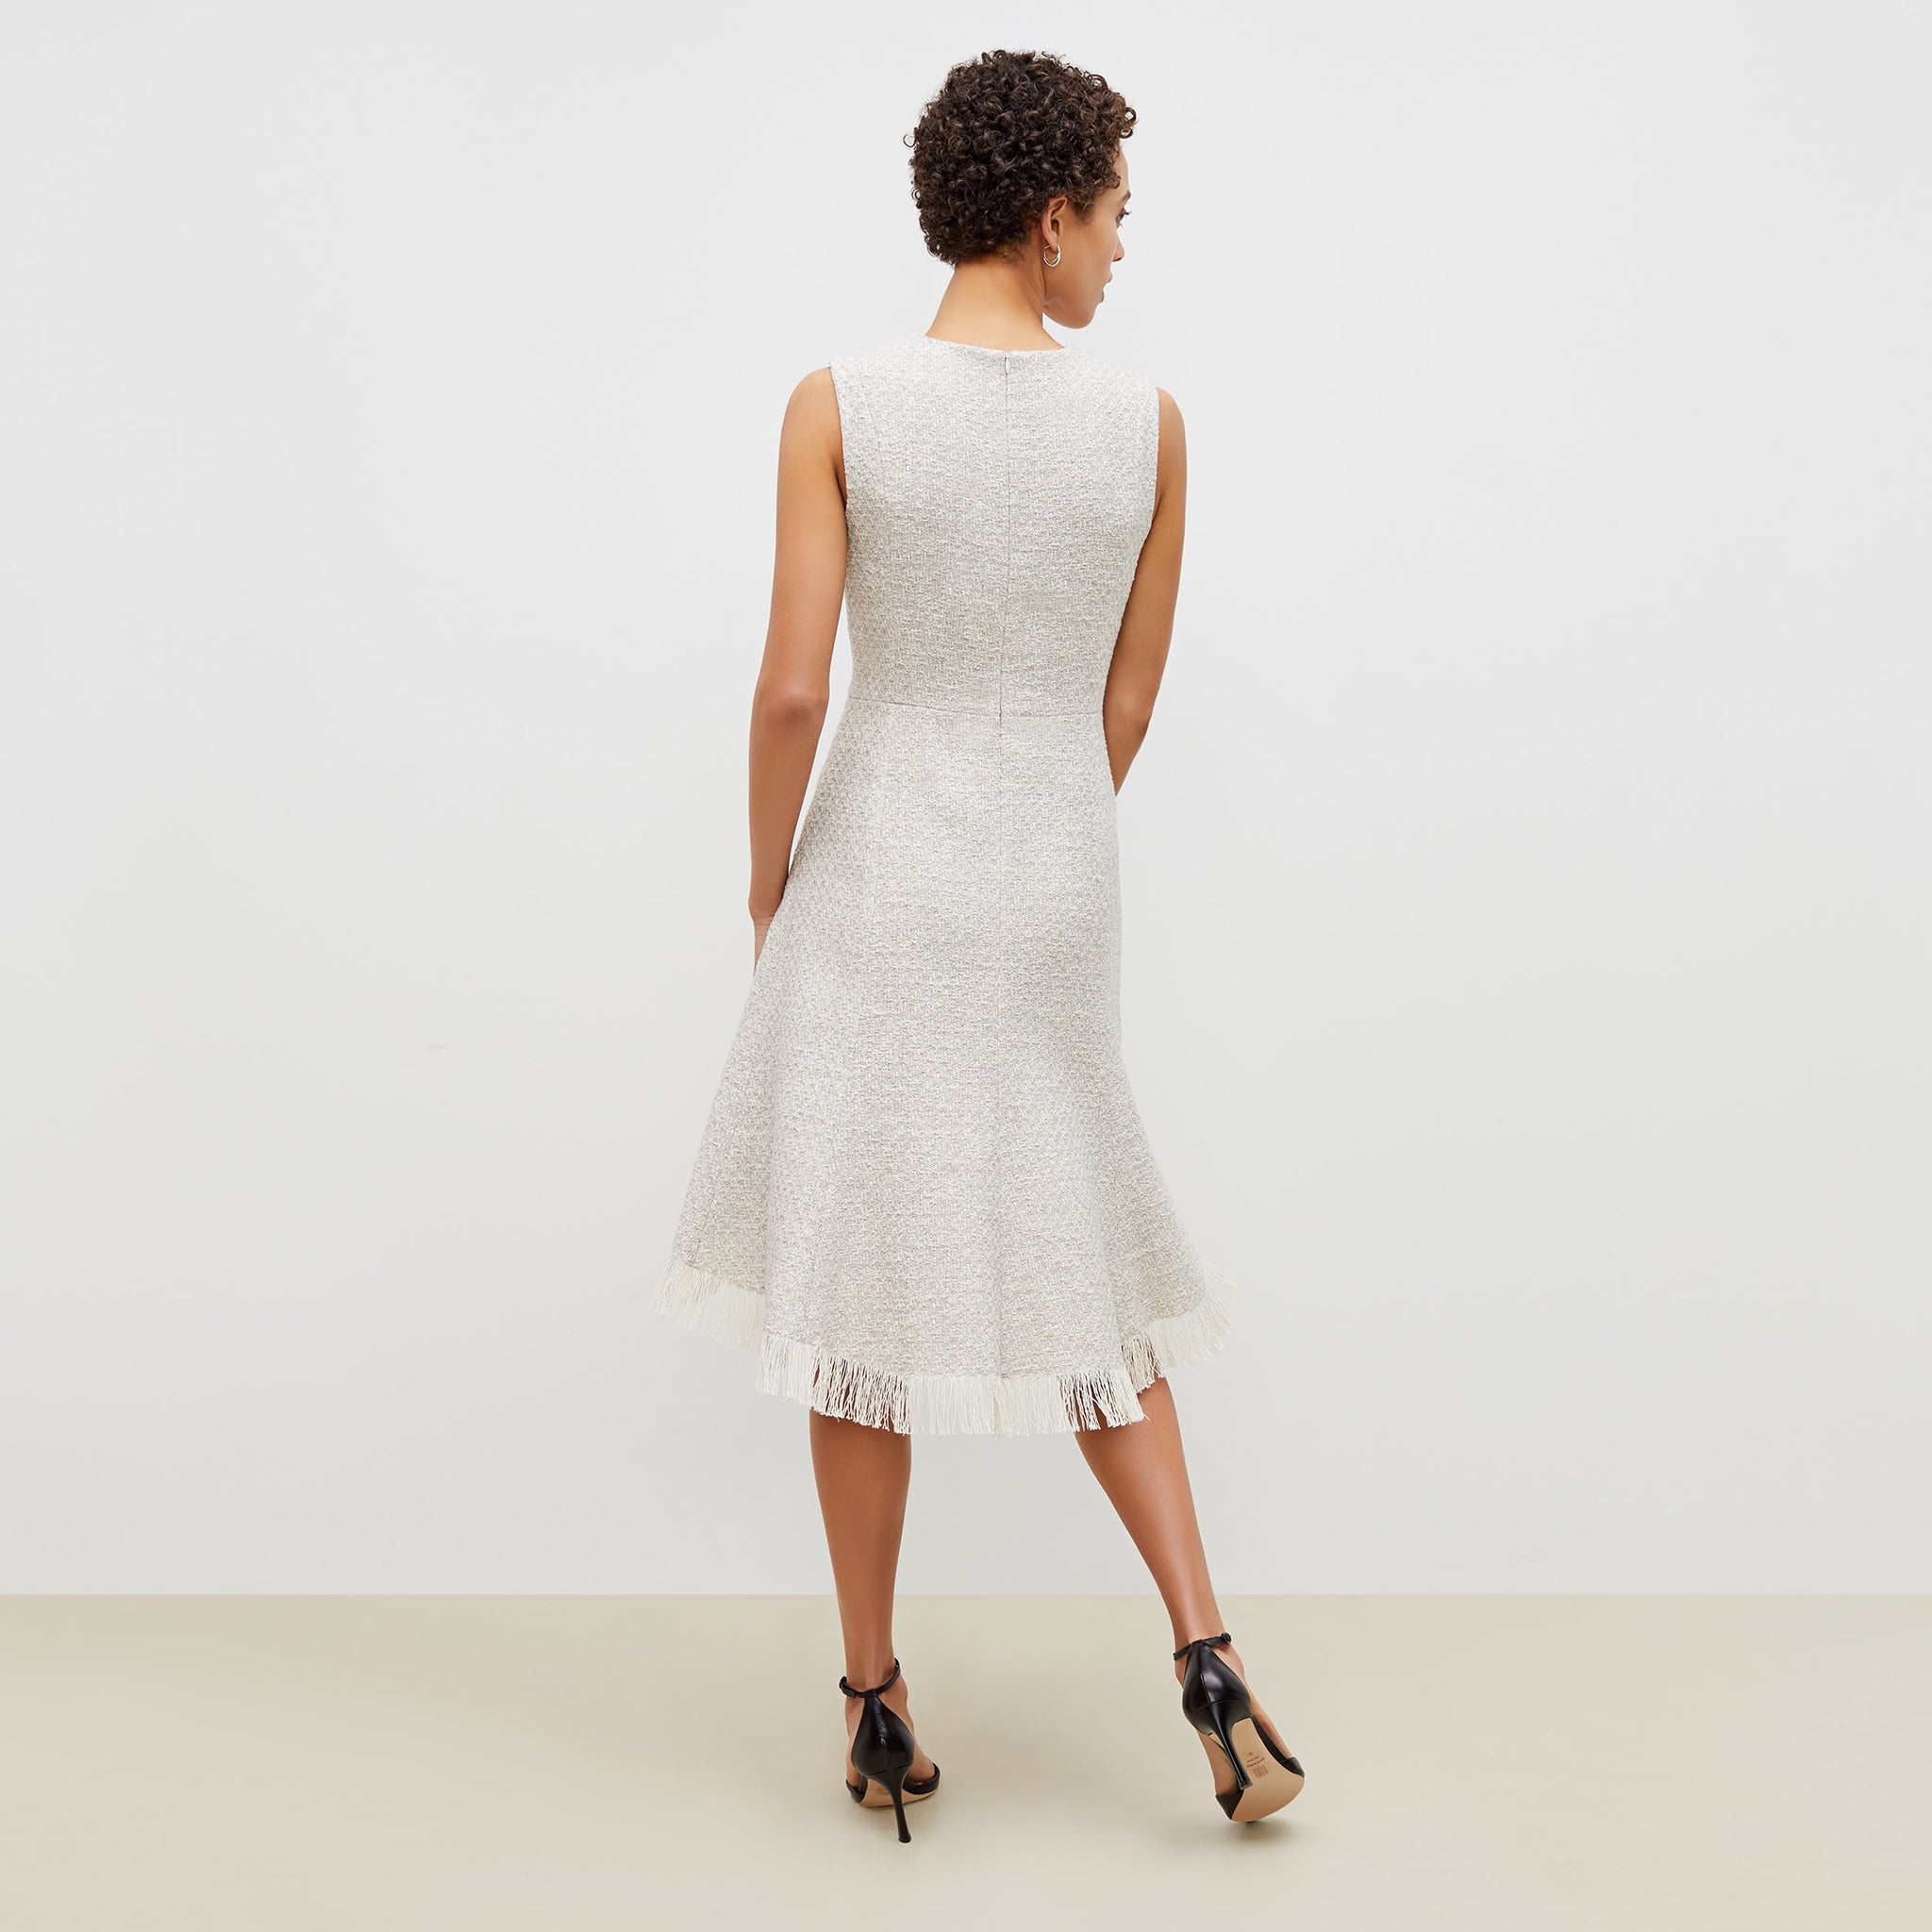 Back image of a woman standing wearing the lindsay dress cotton boucle in sea salt / ivory